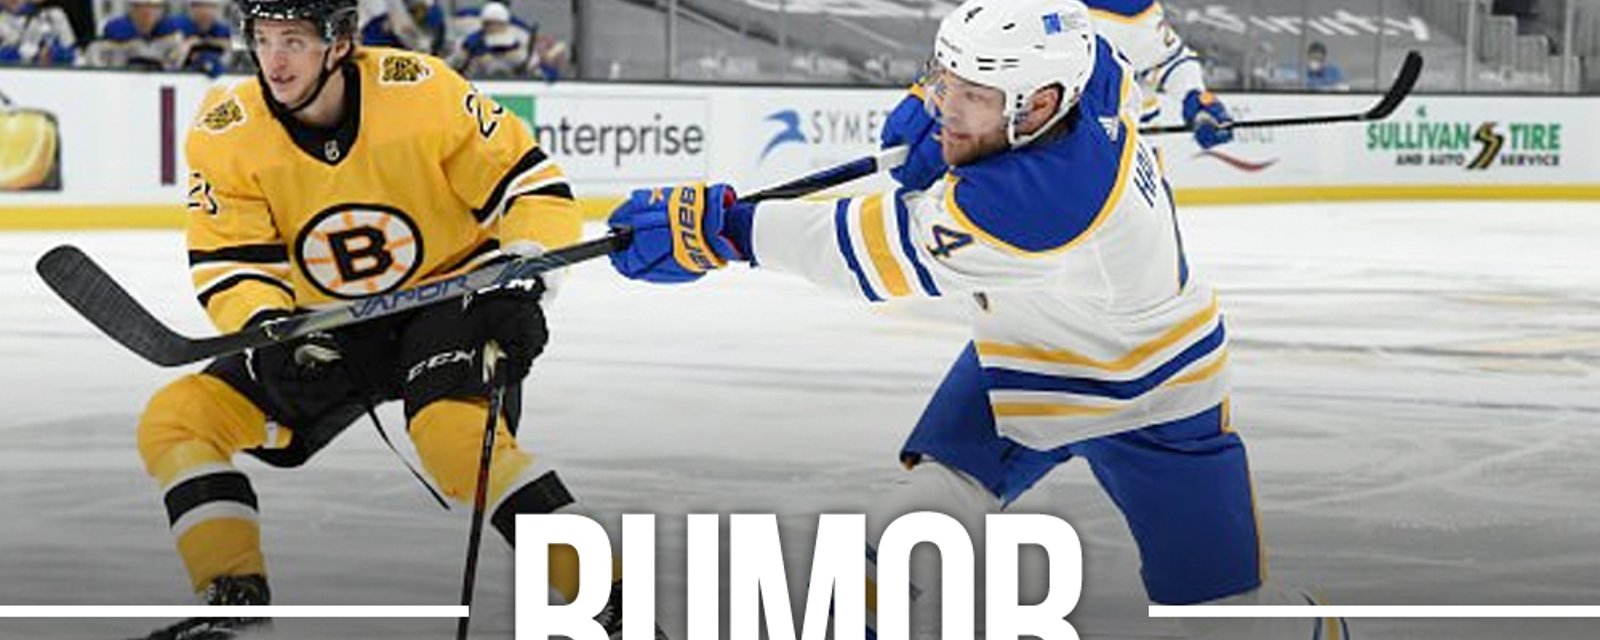 Report: Sabres traded Hall to Boston, despite better offer from Western Conference team